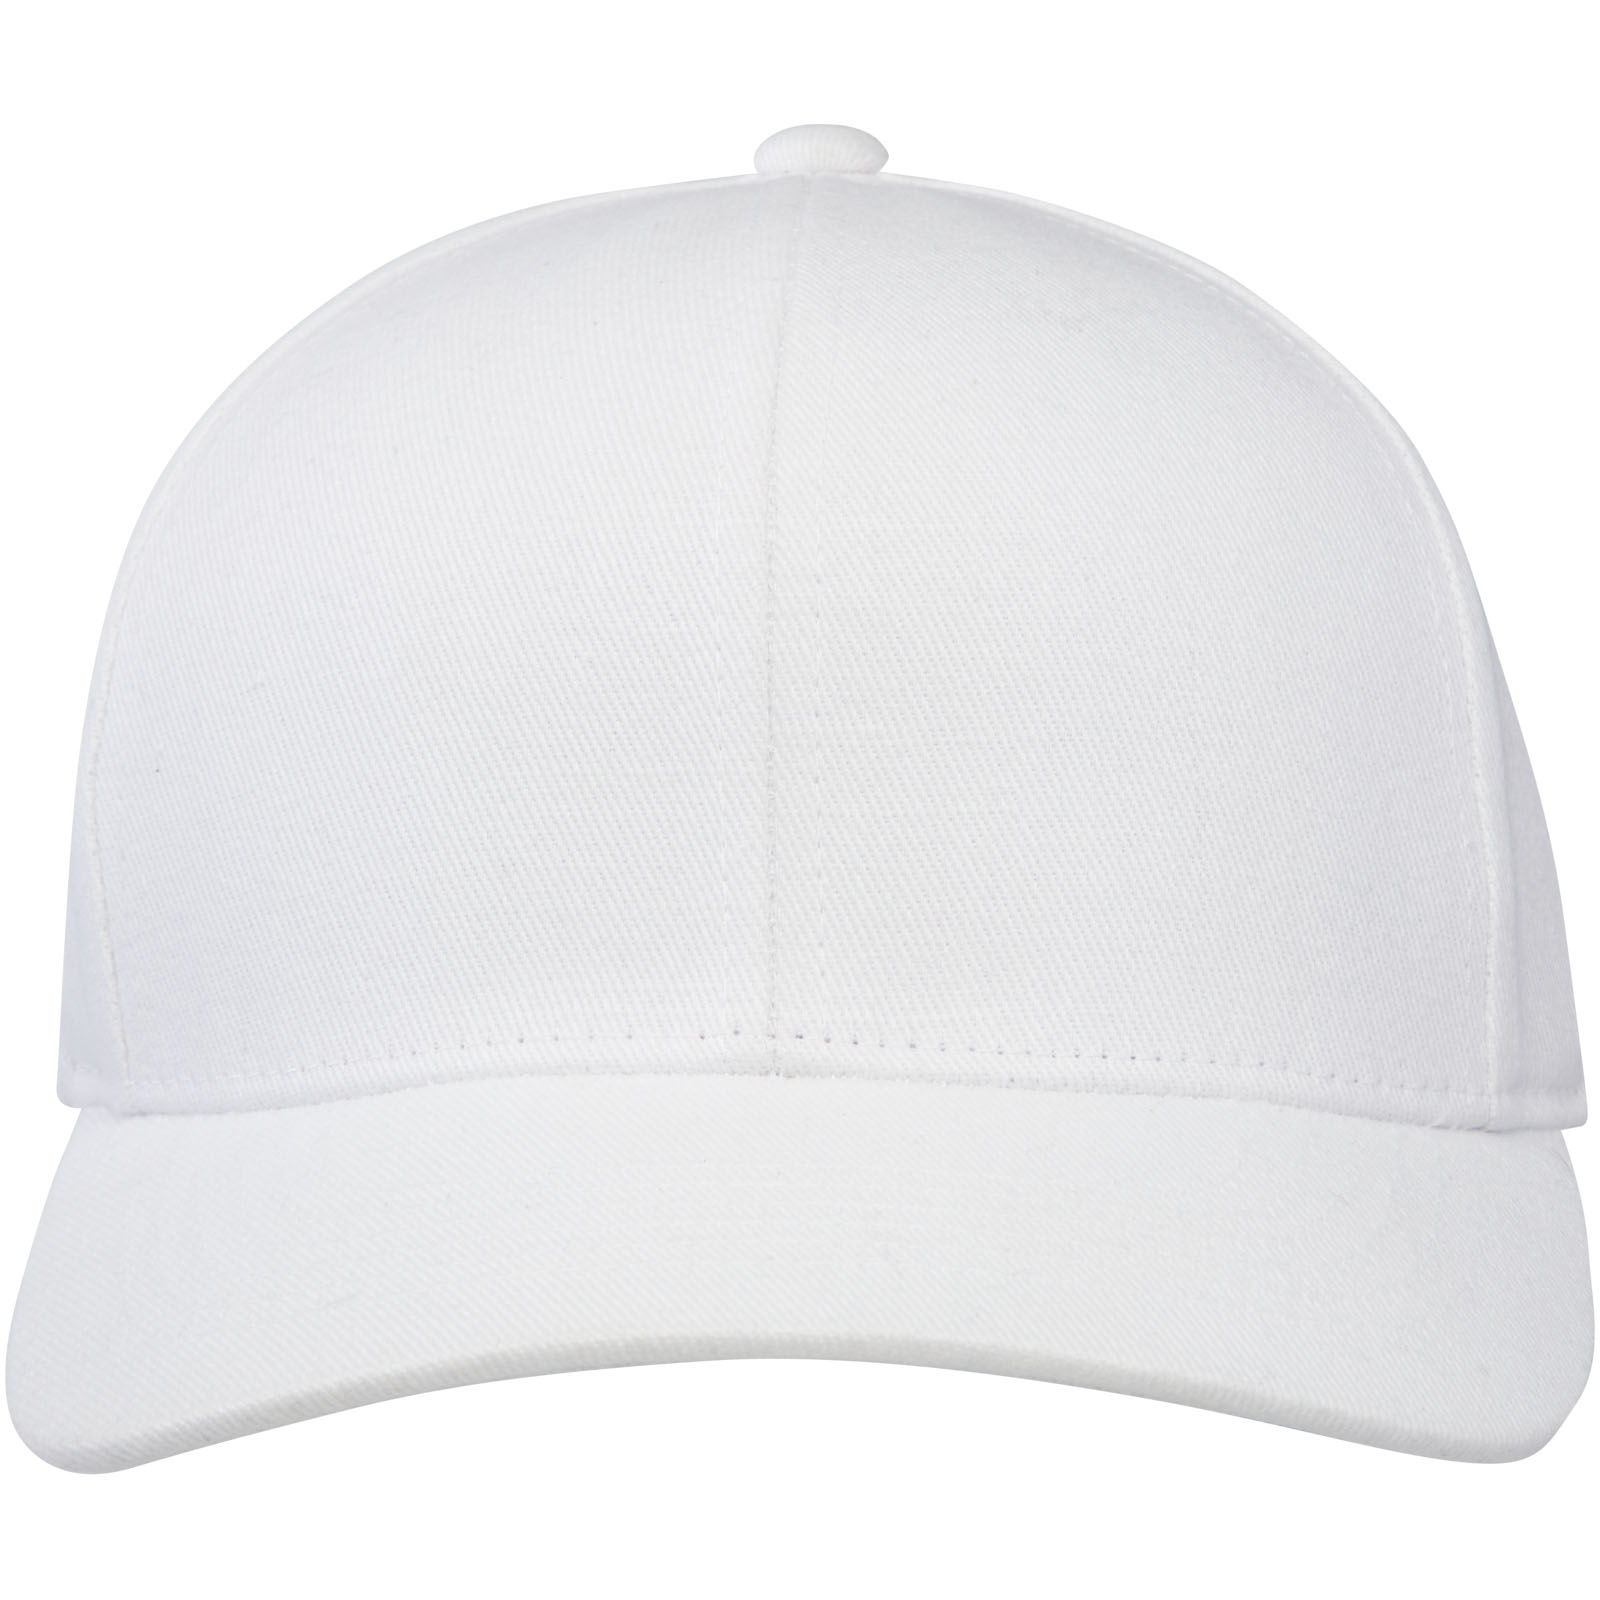 Advertising Caps & Hats - Opal 6 panel Aware™ recycled cap - 1